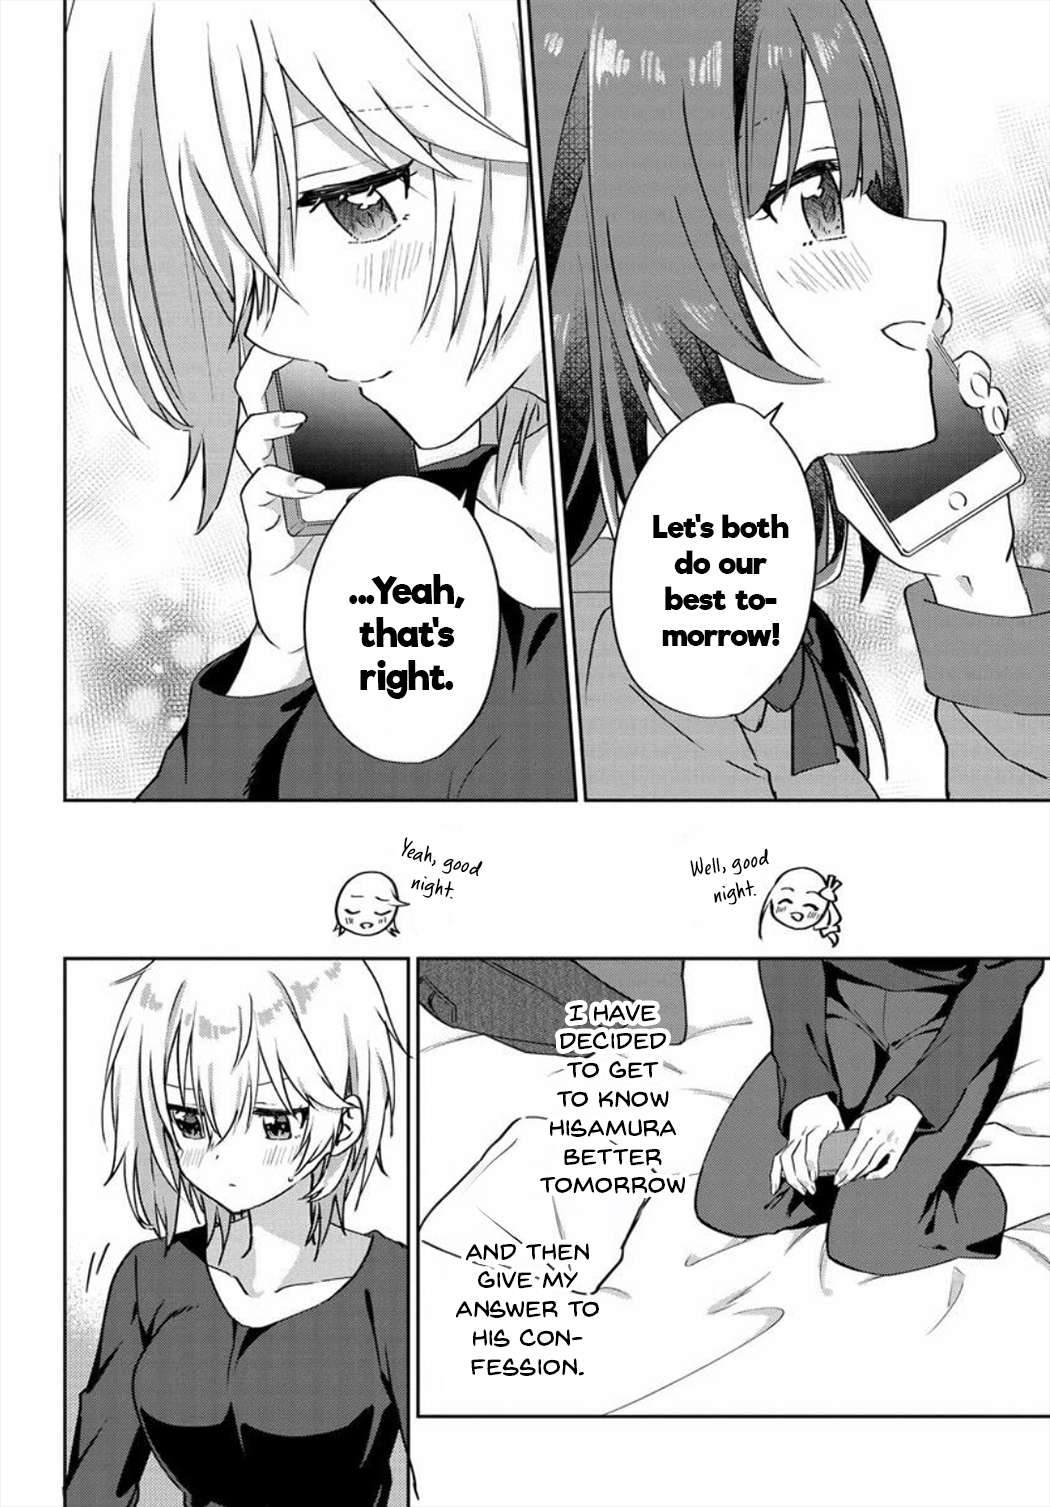 Since I’Ve Entered The World Of Romantic Comedy Manga, I’Ll Do My Best To Make The Losing Heroine Happy - chapter 6.6 - #6